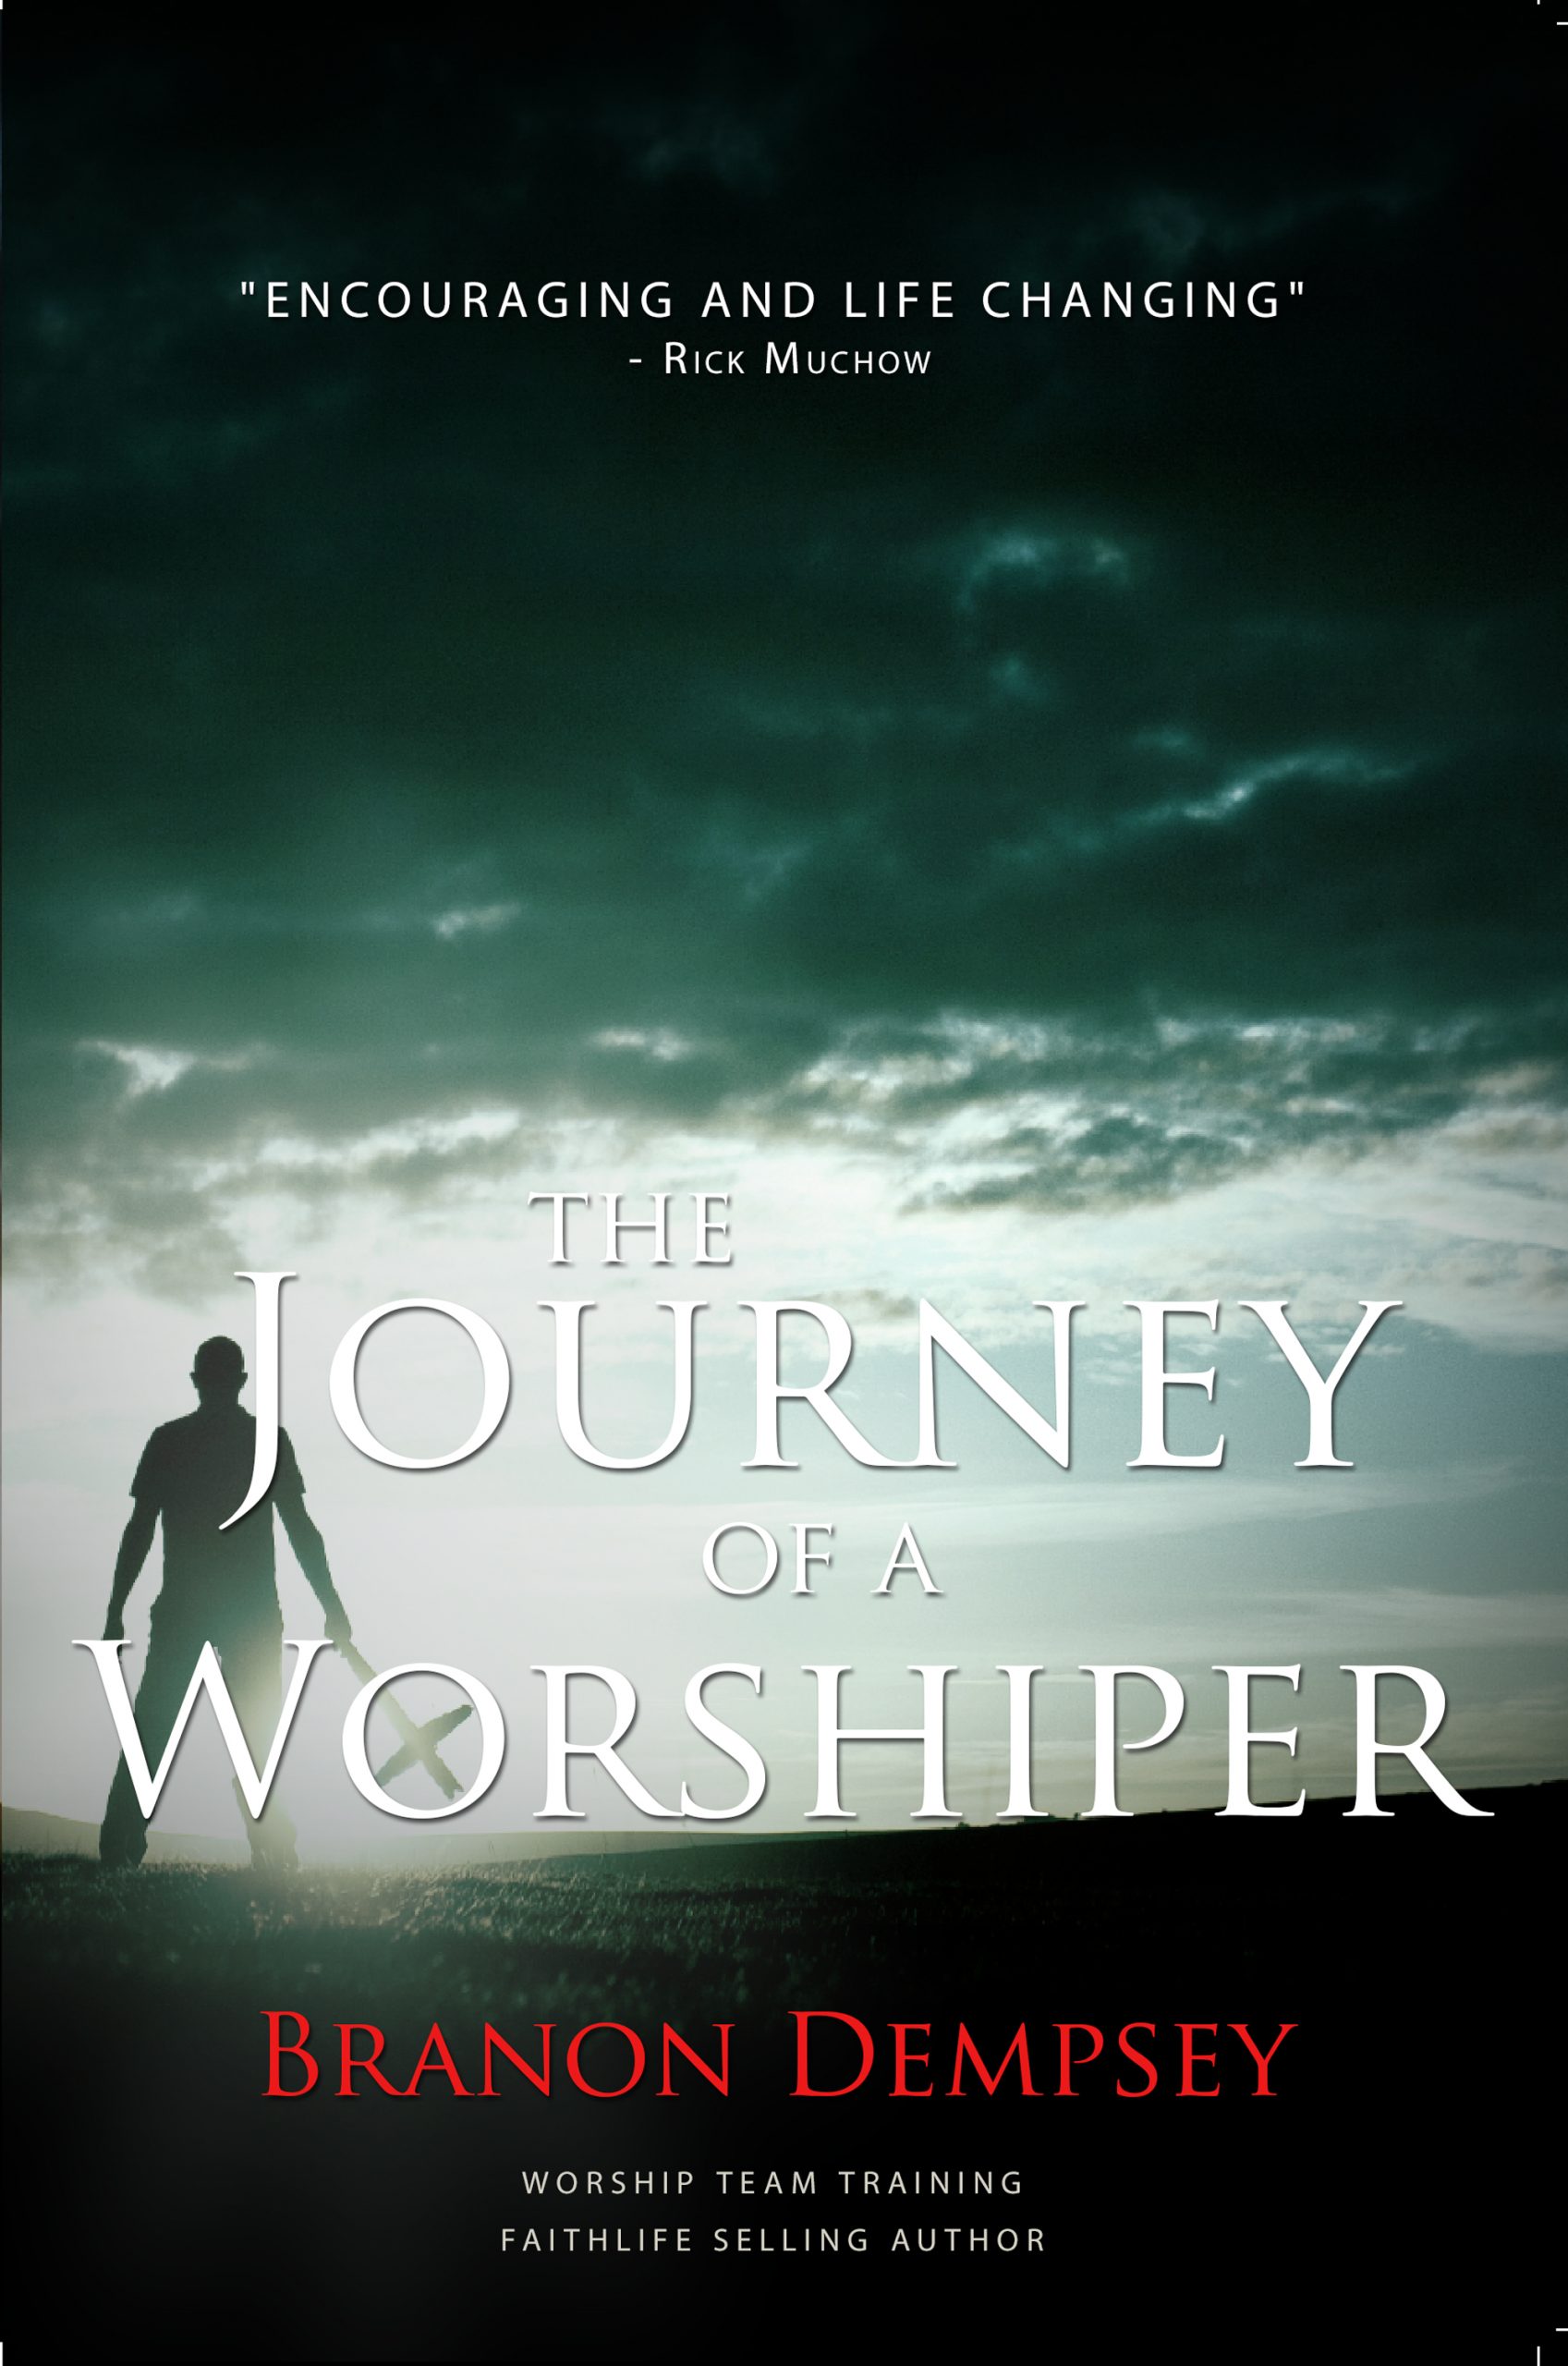 The Journey of a Worshiper